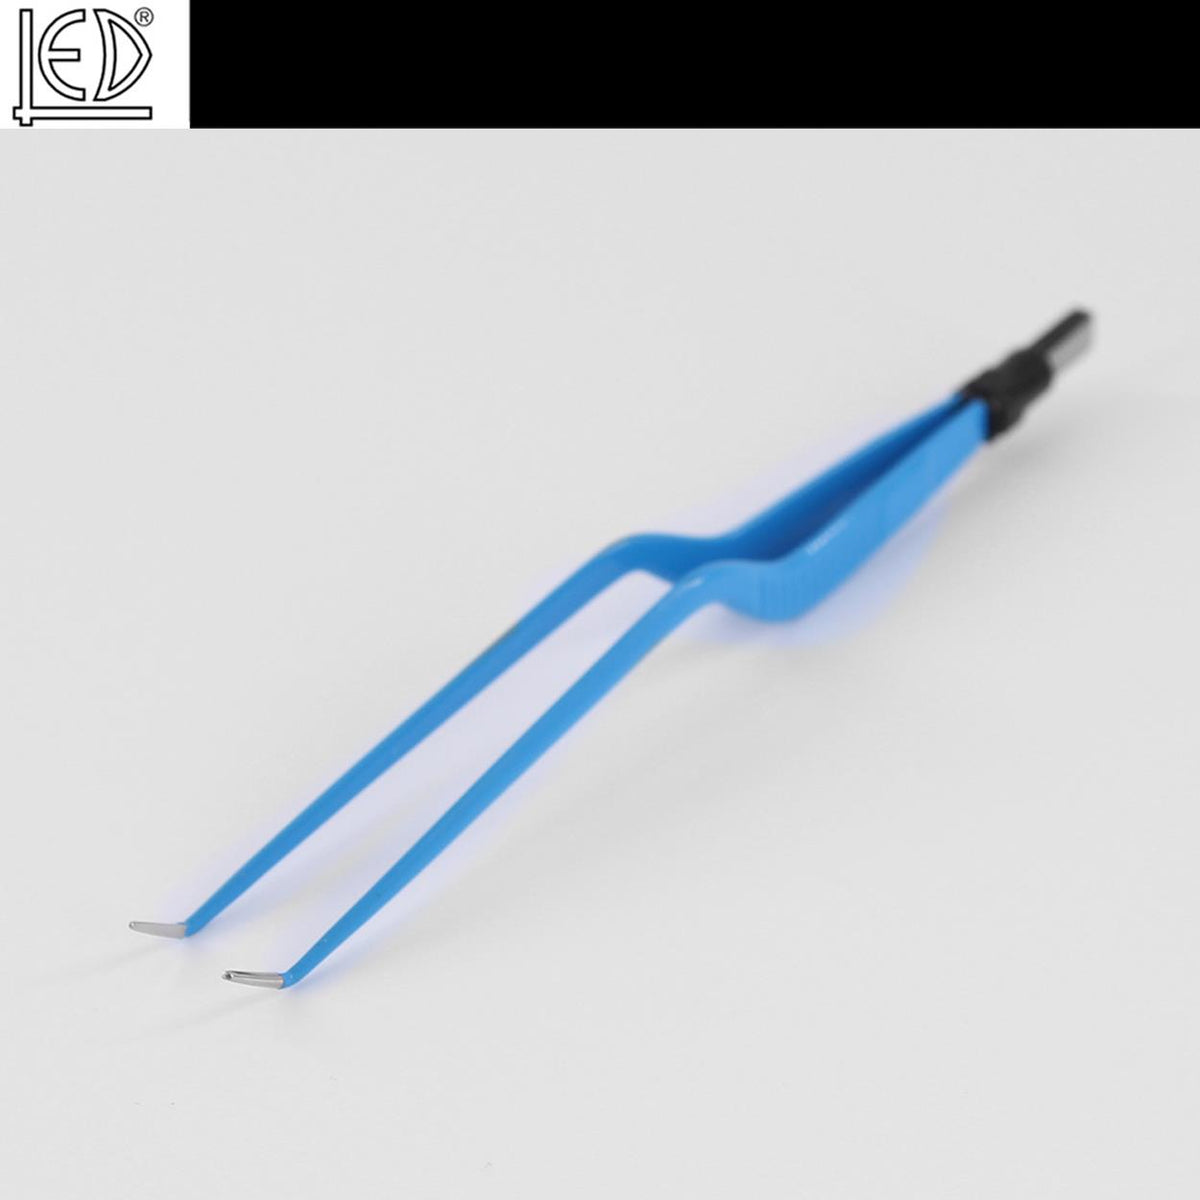 DentrealStore - LED SpA Surtron Bipolar Forceps Angled Curved